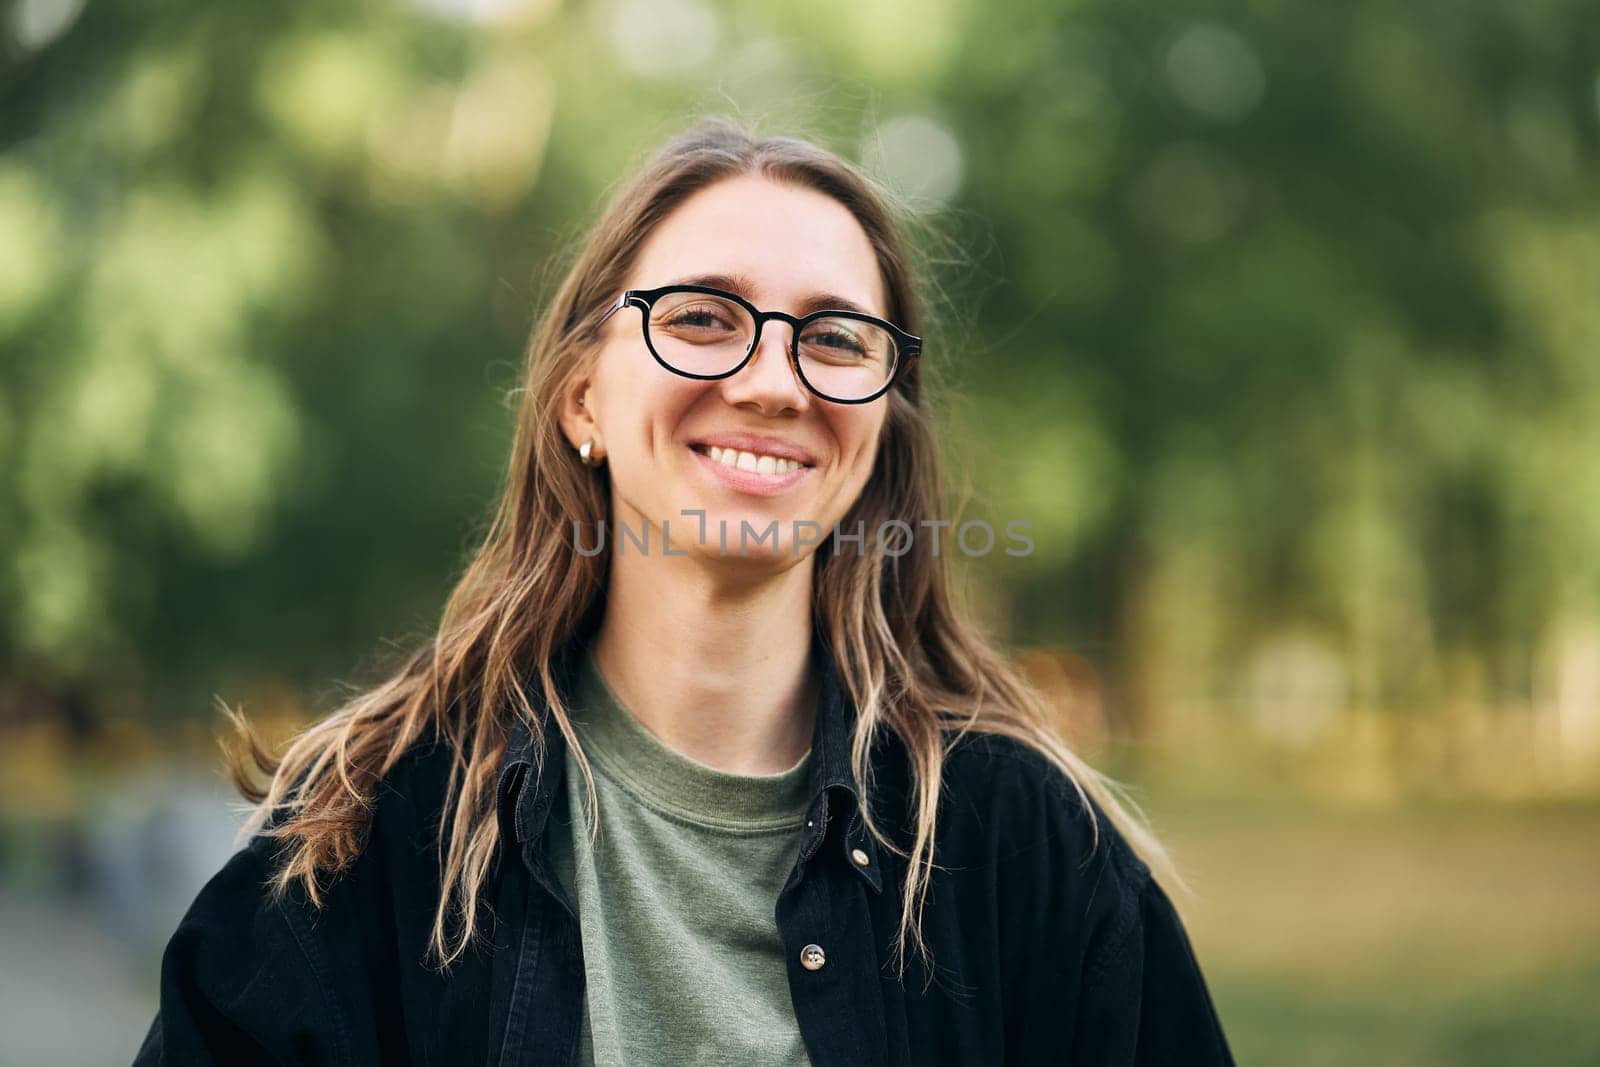 Portrait of a smiling young girl with glasses in the park. High-quality photo